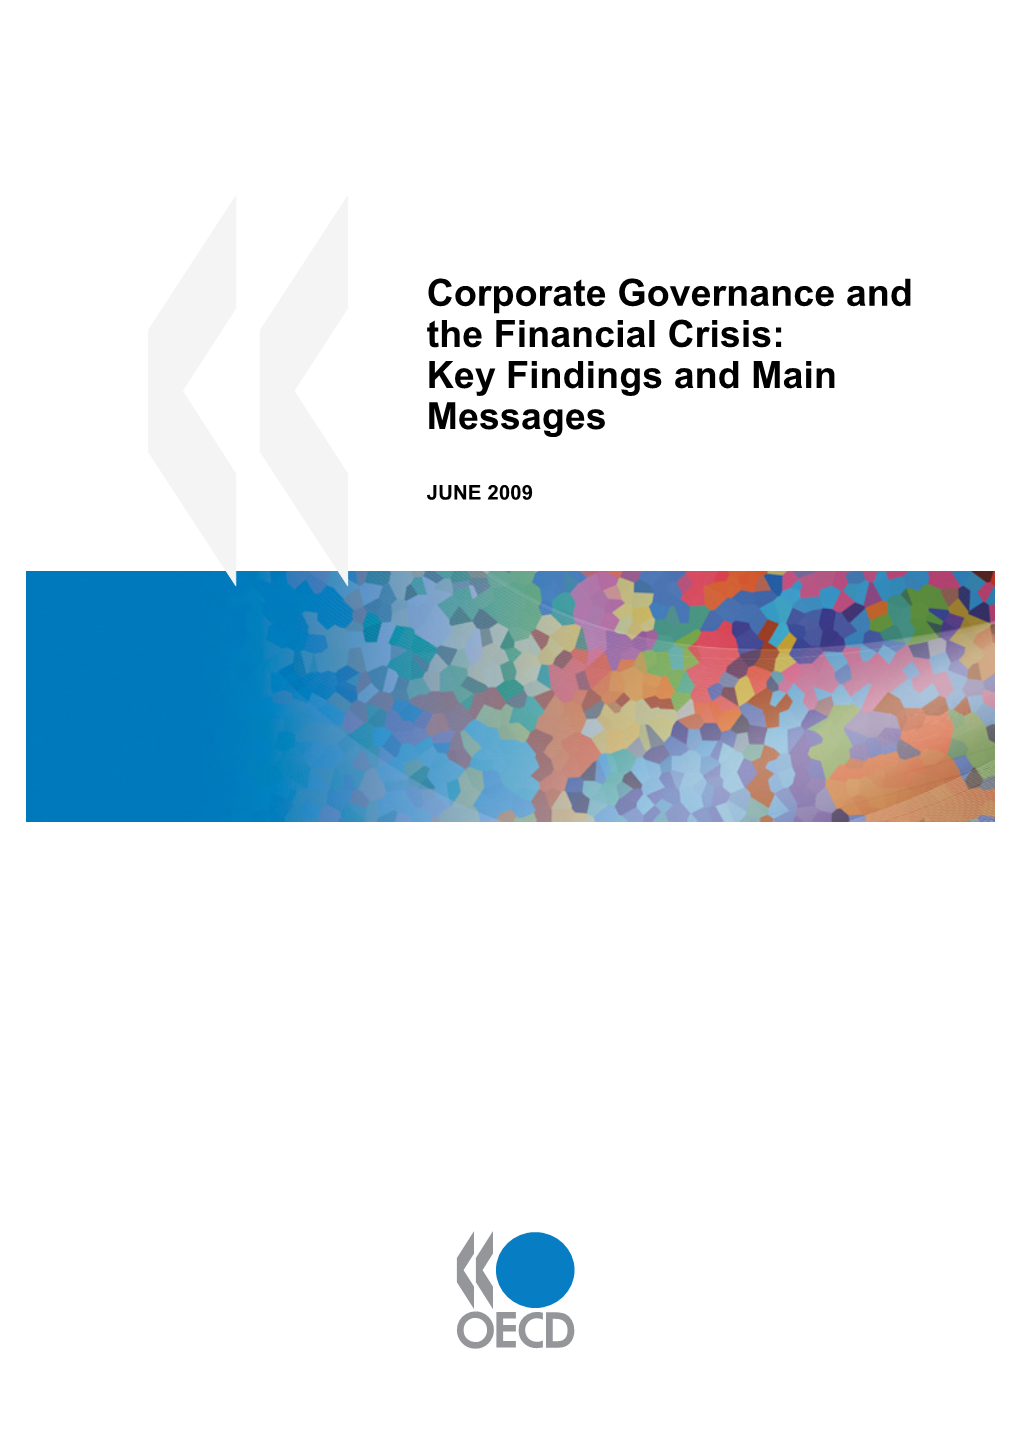 Corporate Governance and the Financial Crisis: Key Findings and Main Messages